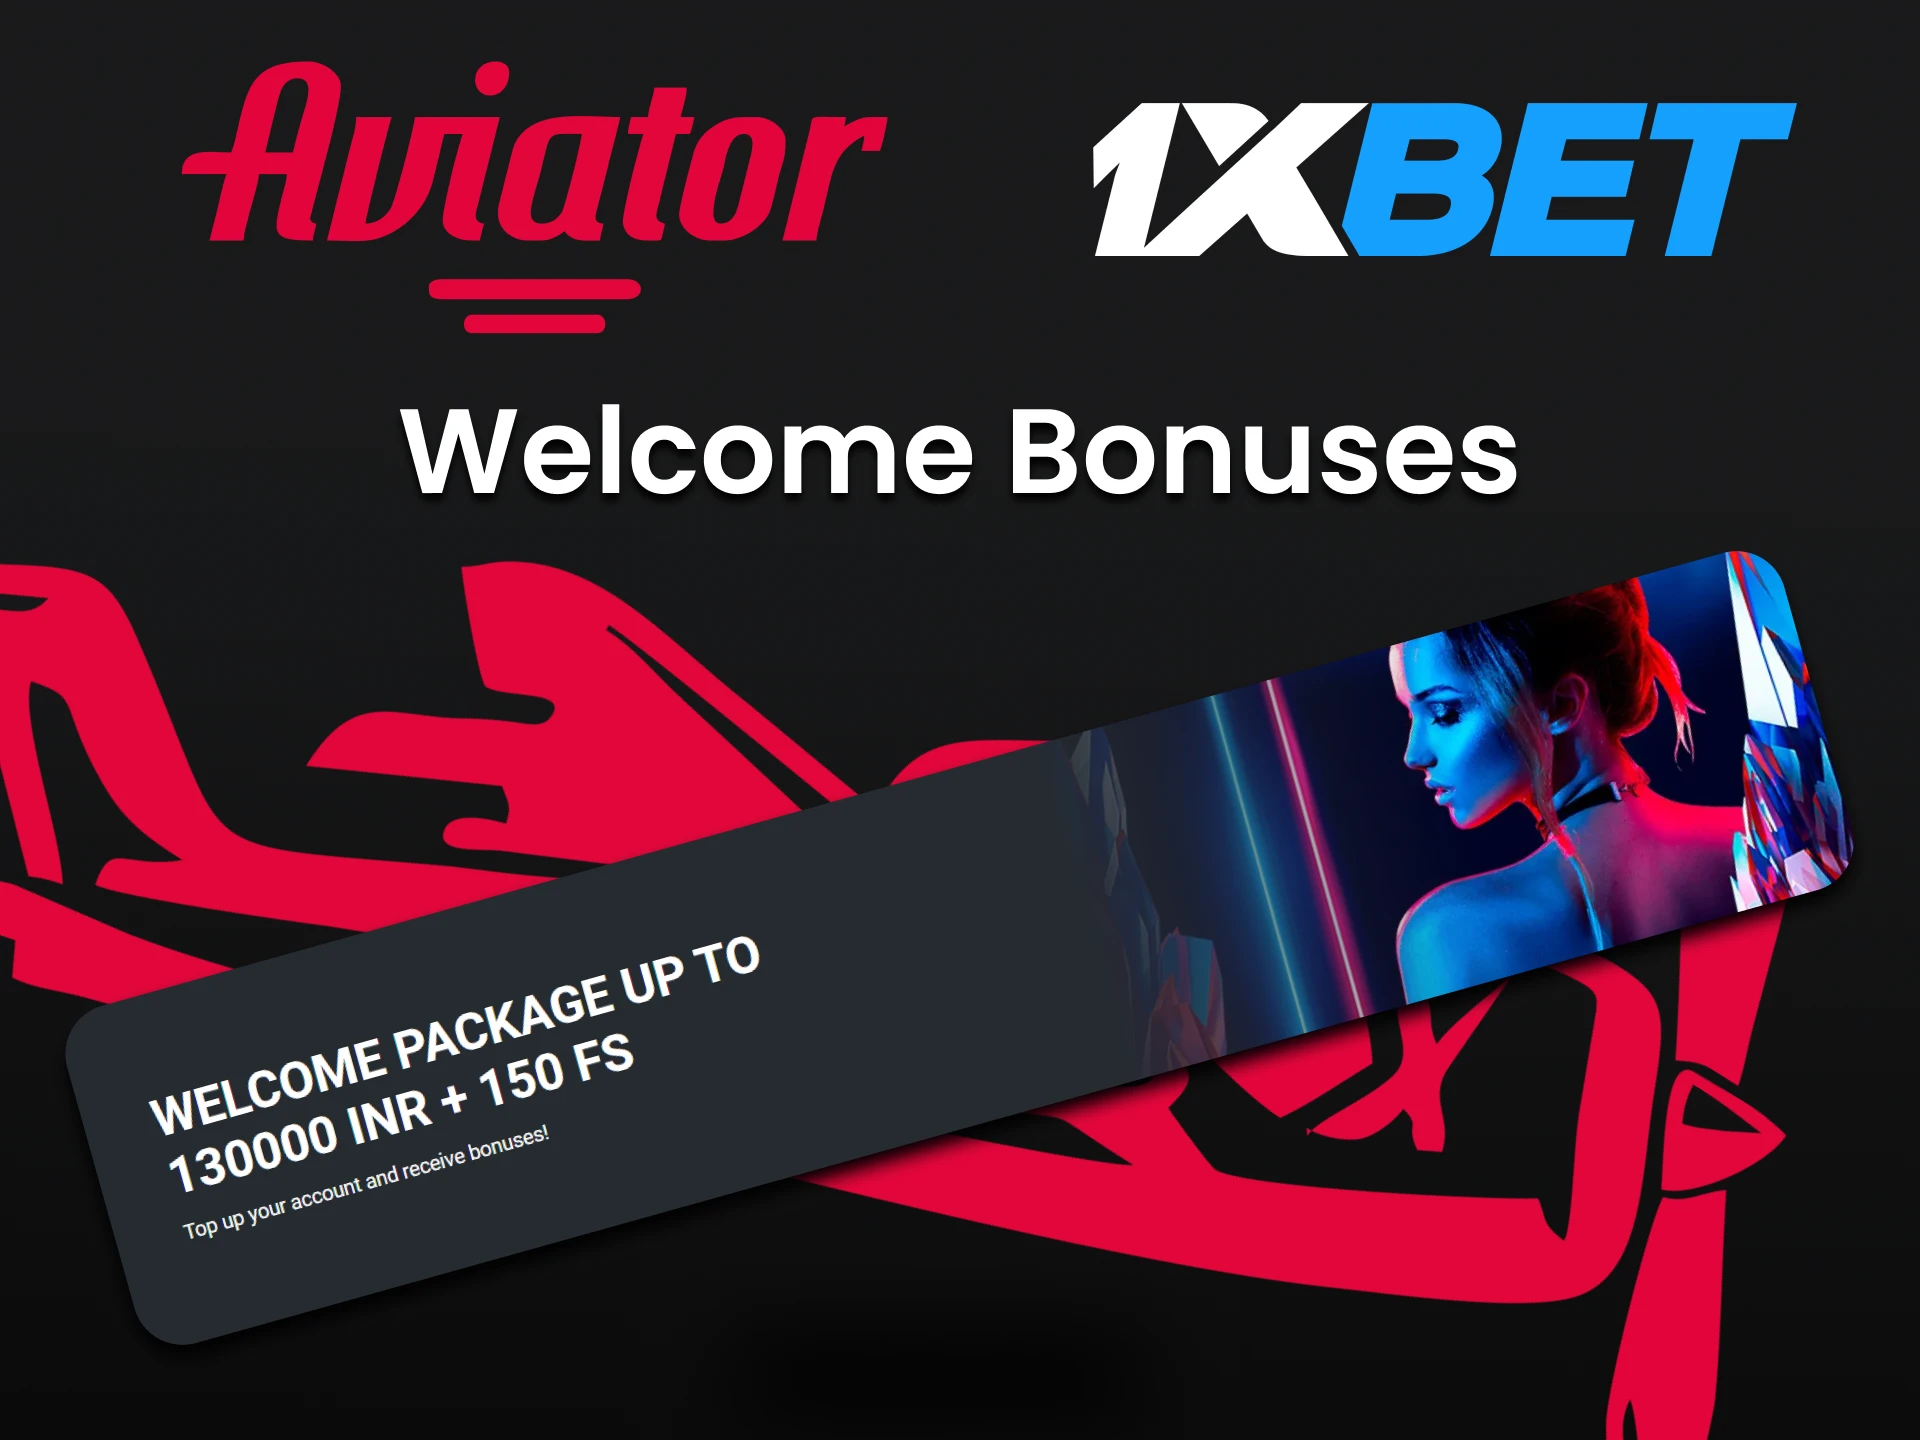 Play Aviator at 1xbet and get bonuses.